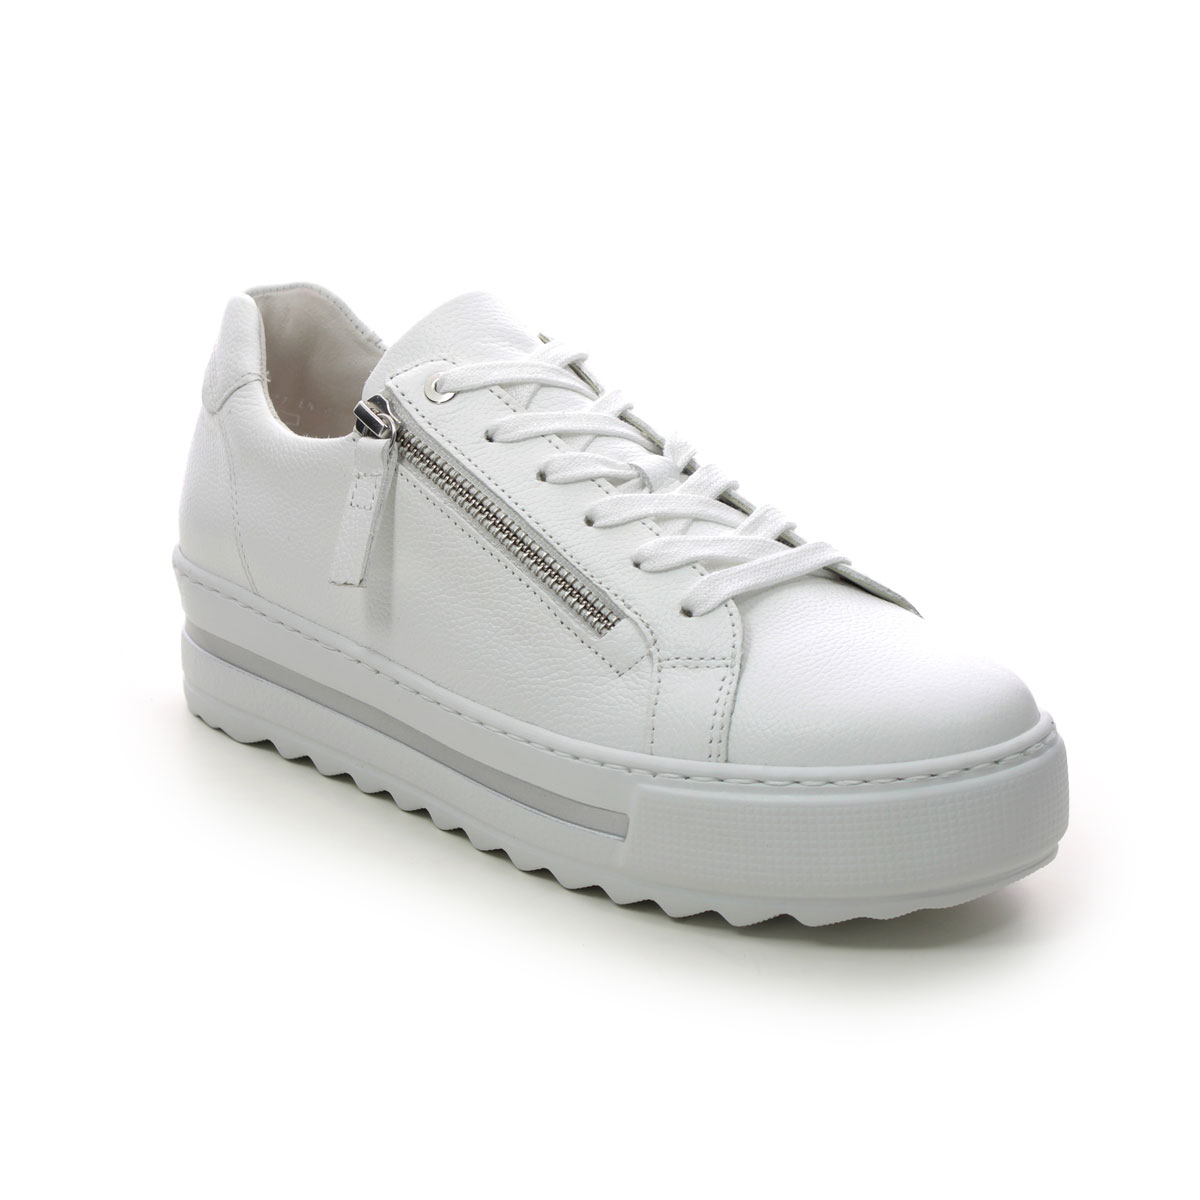 Gabor Heather White Leather Womens Trainers 26.498.50 In Size 5 In Plain White Leather  Womens Trainers In Soft White Leather Leather